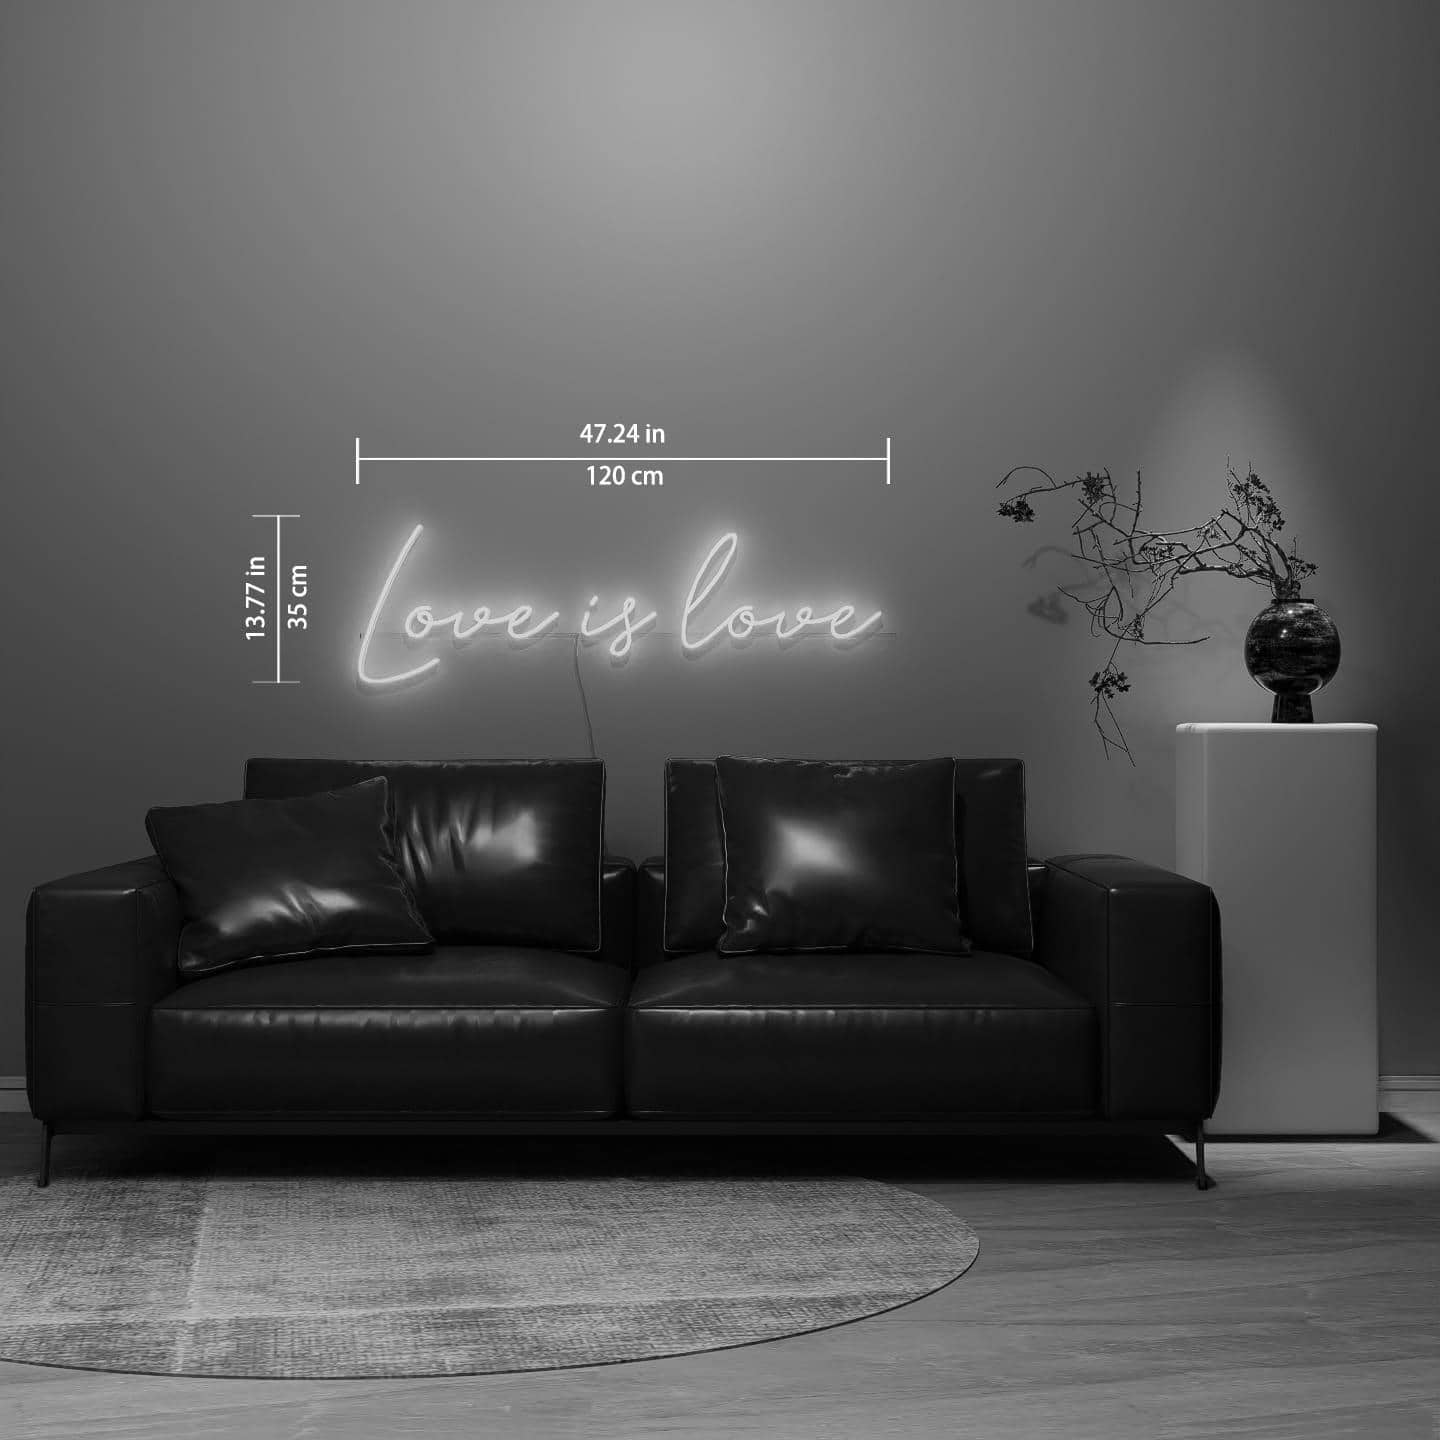 dark-night-shot-of-illuminated-white-neon-light-size-chart-hanging-on-the-wall-for-display-love-is-love